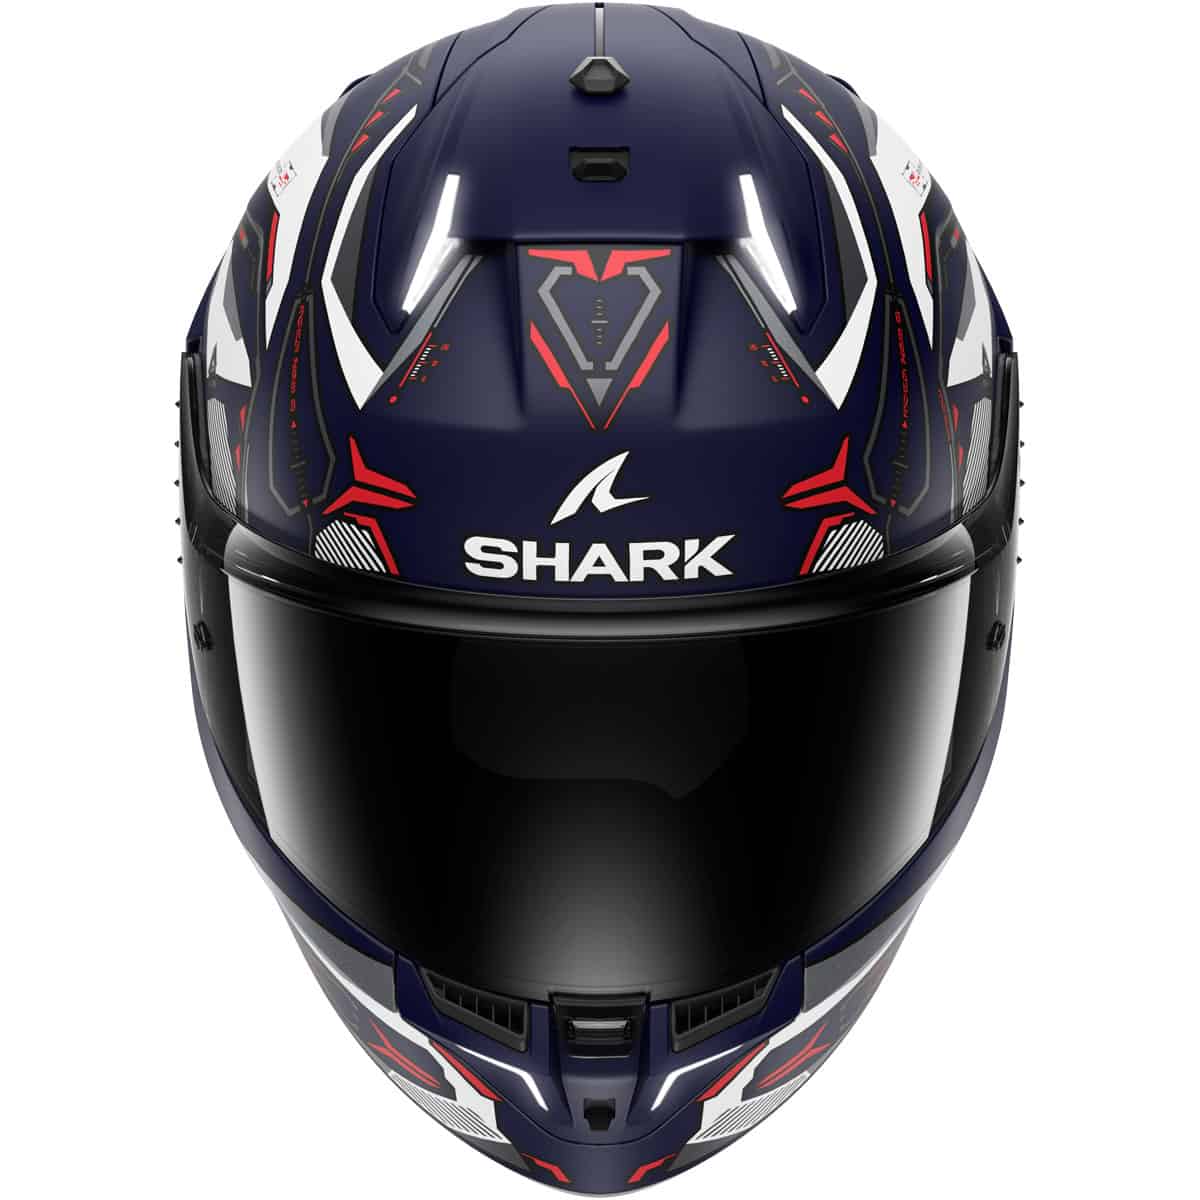 Shark Skwal i3 full face helmet: Shark were able to combine the requirements of the ECE 22-06 certification with a compact and original design inspired by motorsports and leading edge technology. 2